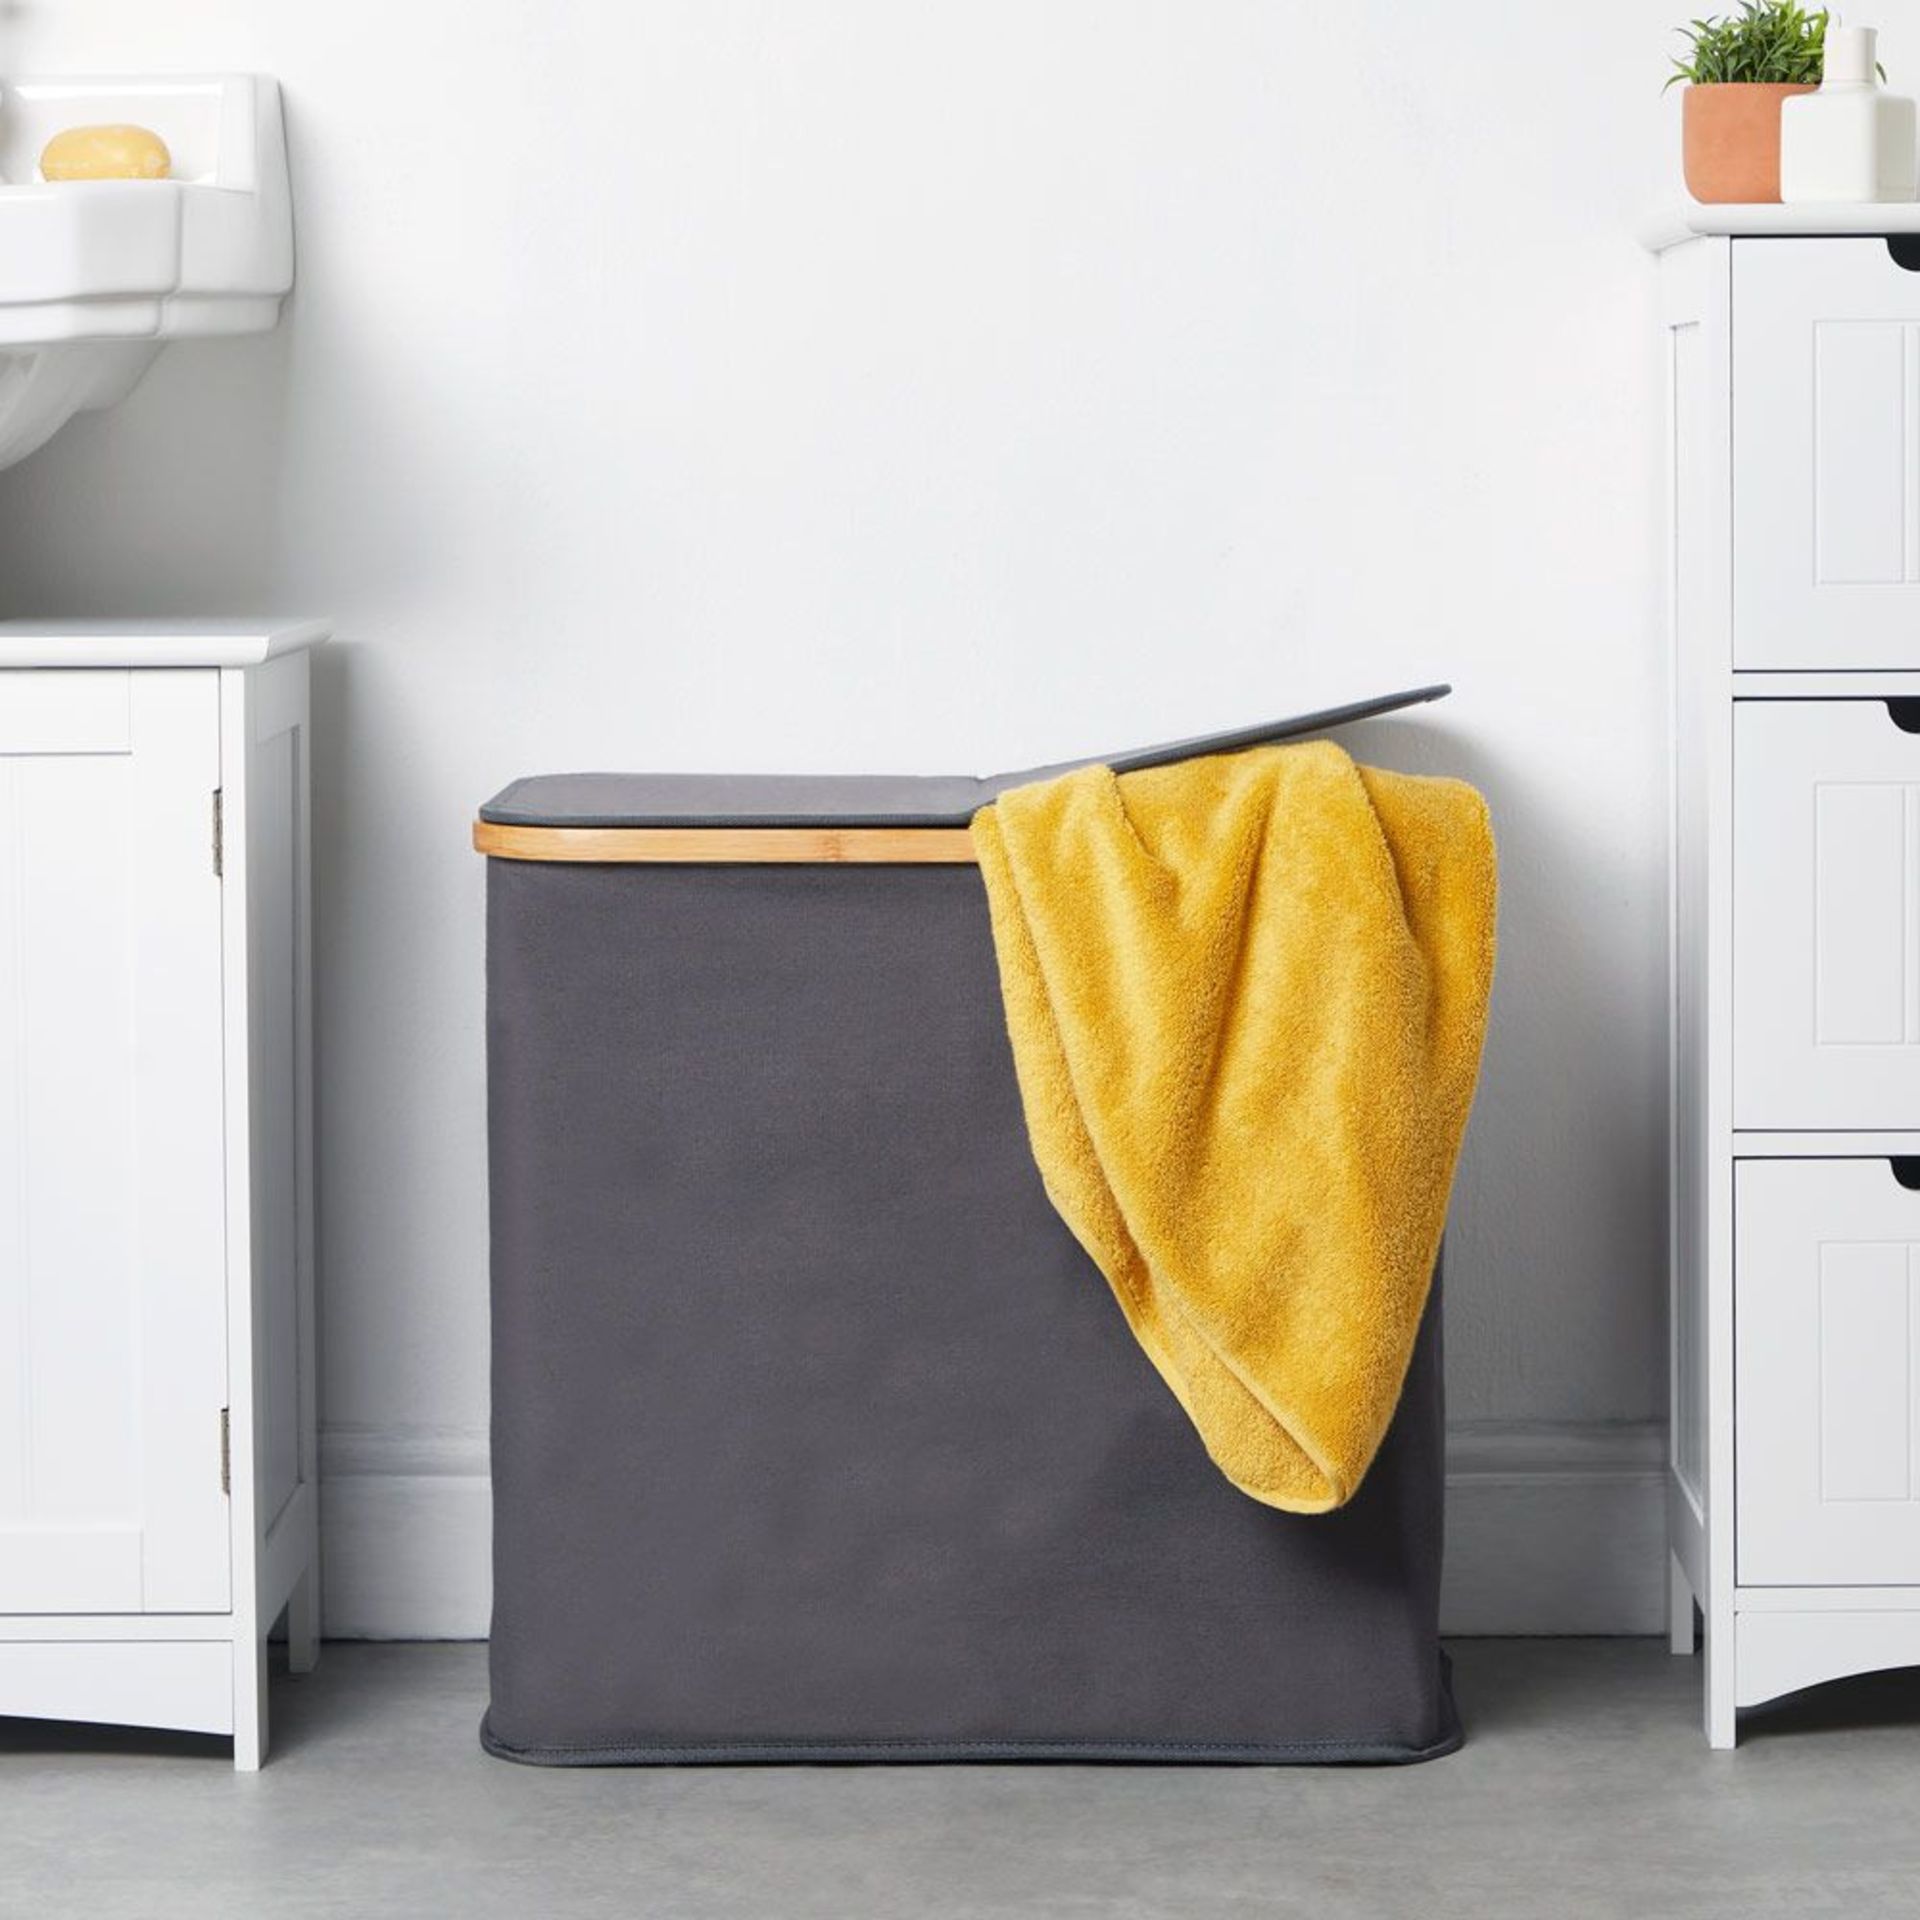 2 Compartment Laundry Basket. Add a little luxury to your laundry and house in this on-trend laundry